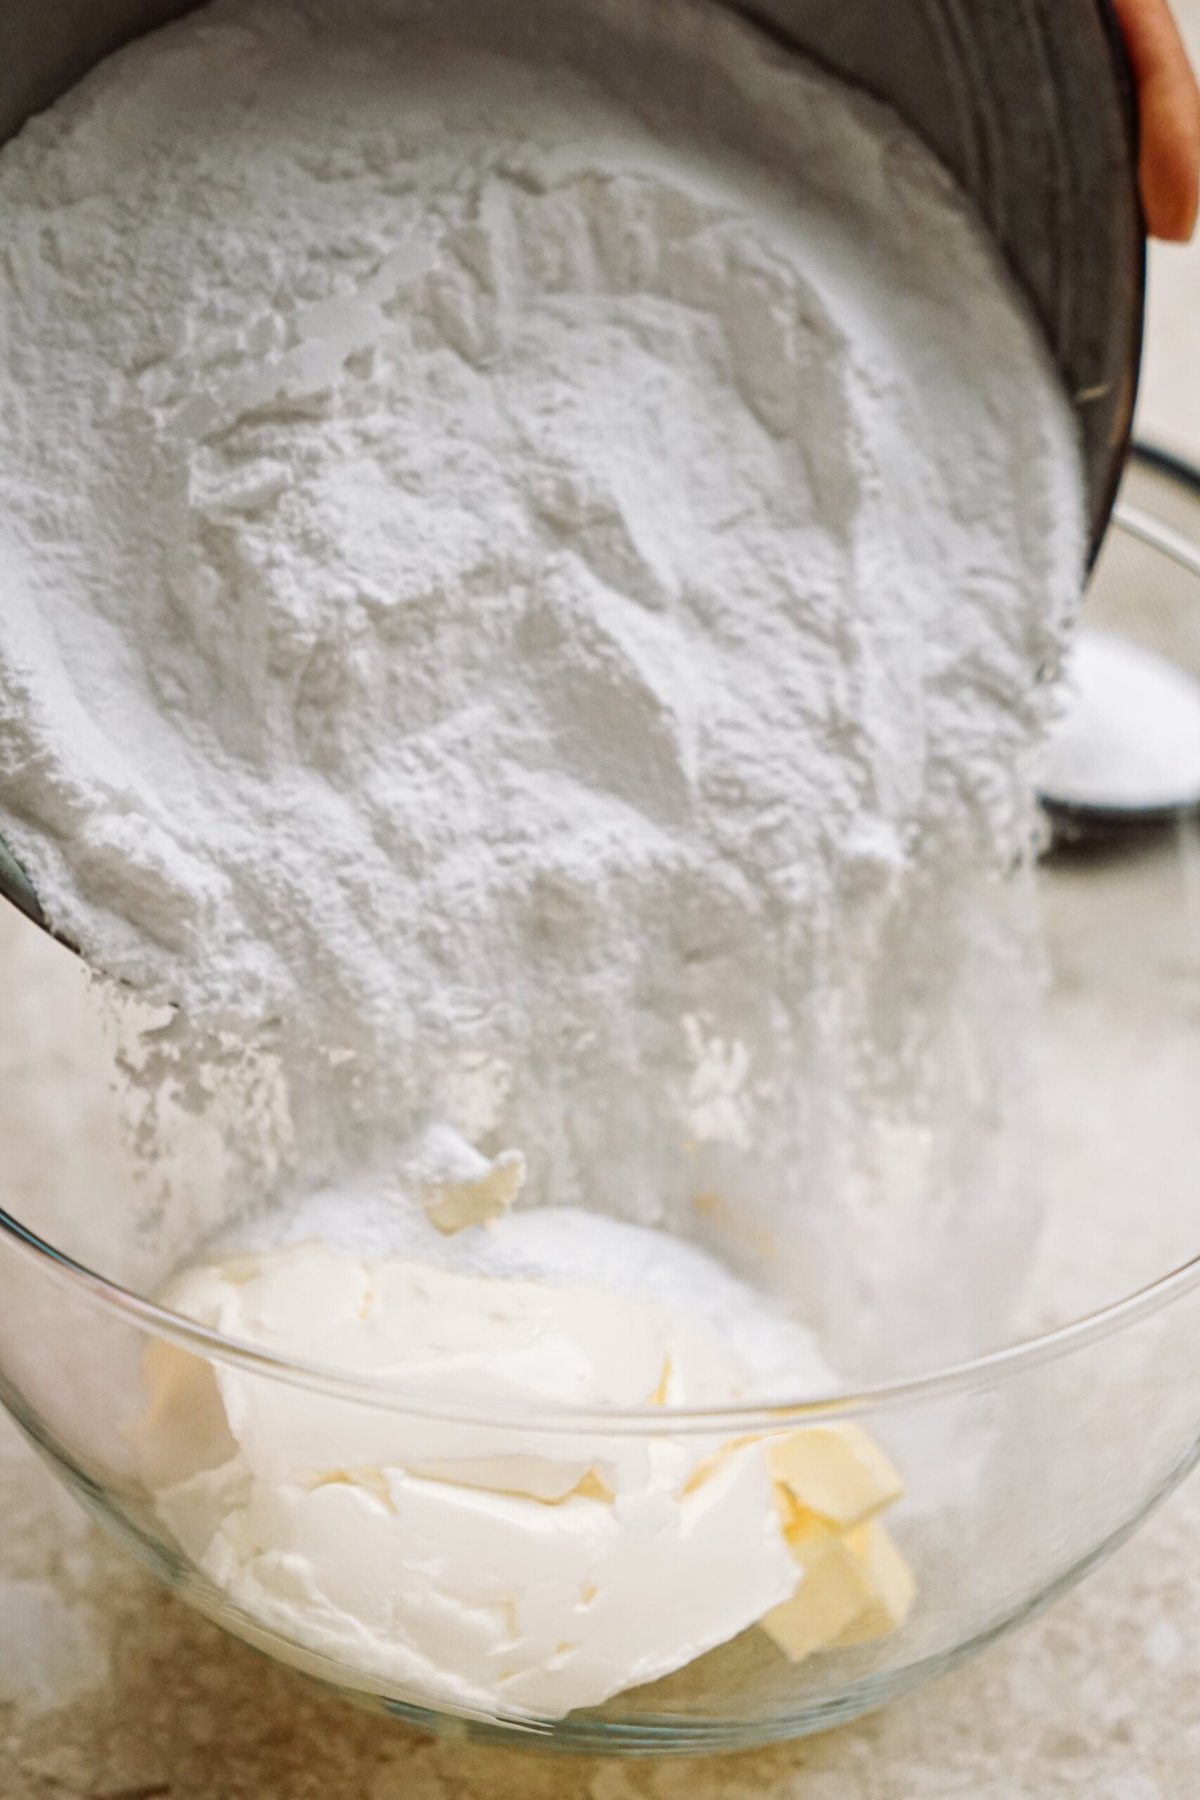 powdered sugar being added to glass mixing bowl